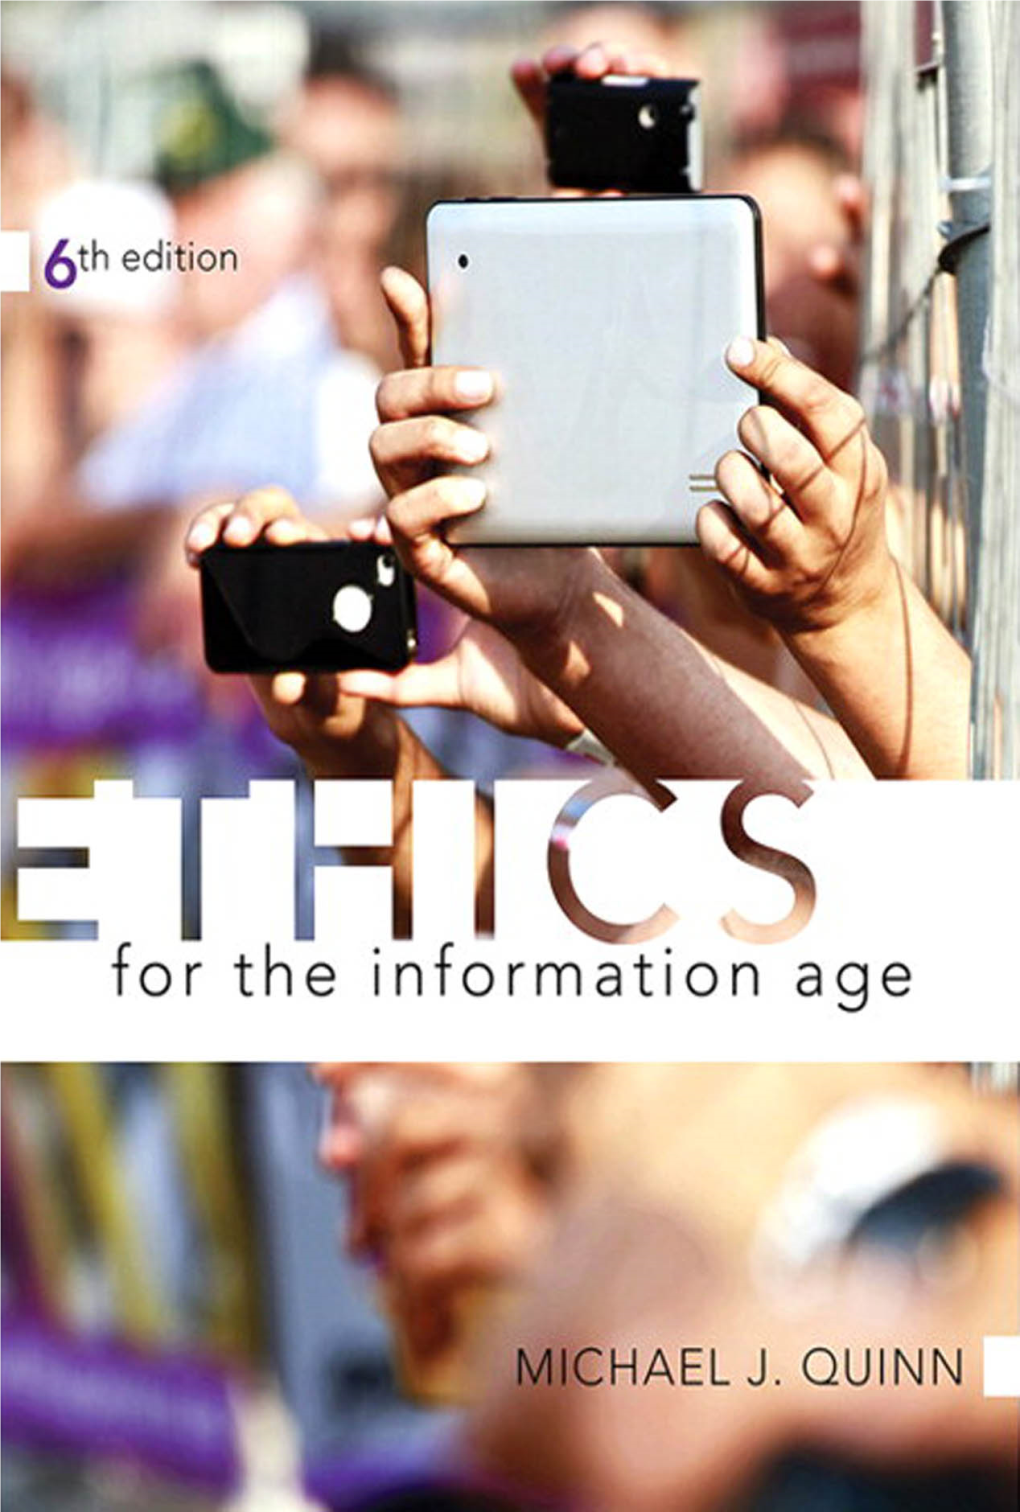 Book-Ethics for the Information Age.Pdf